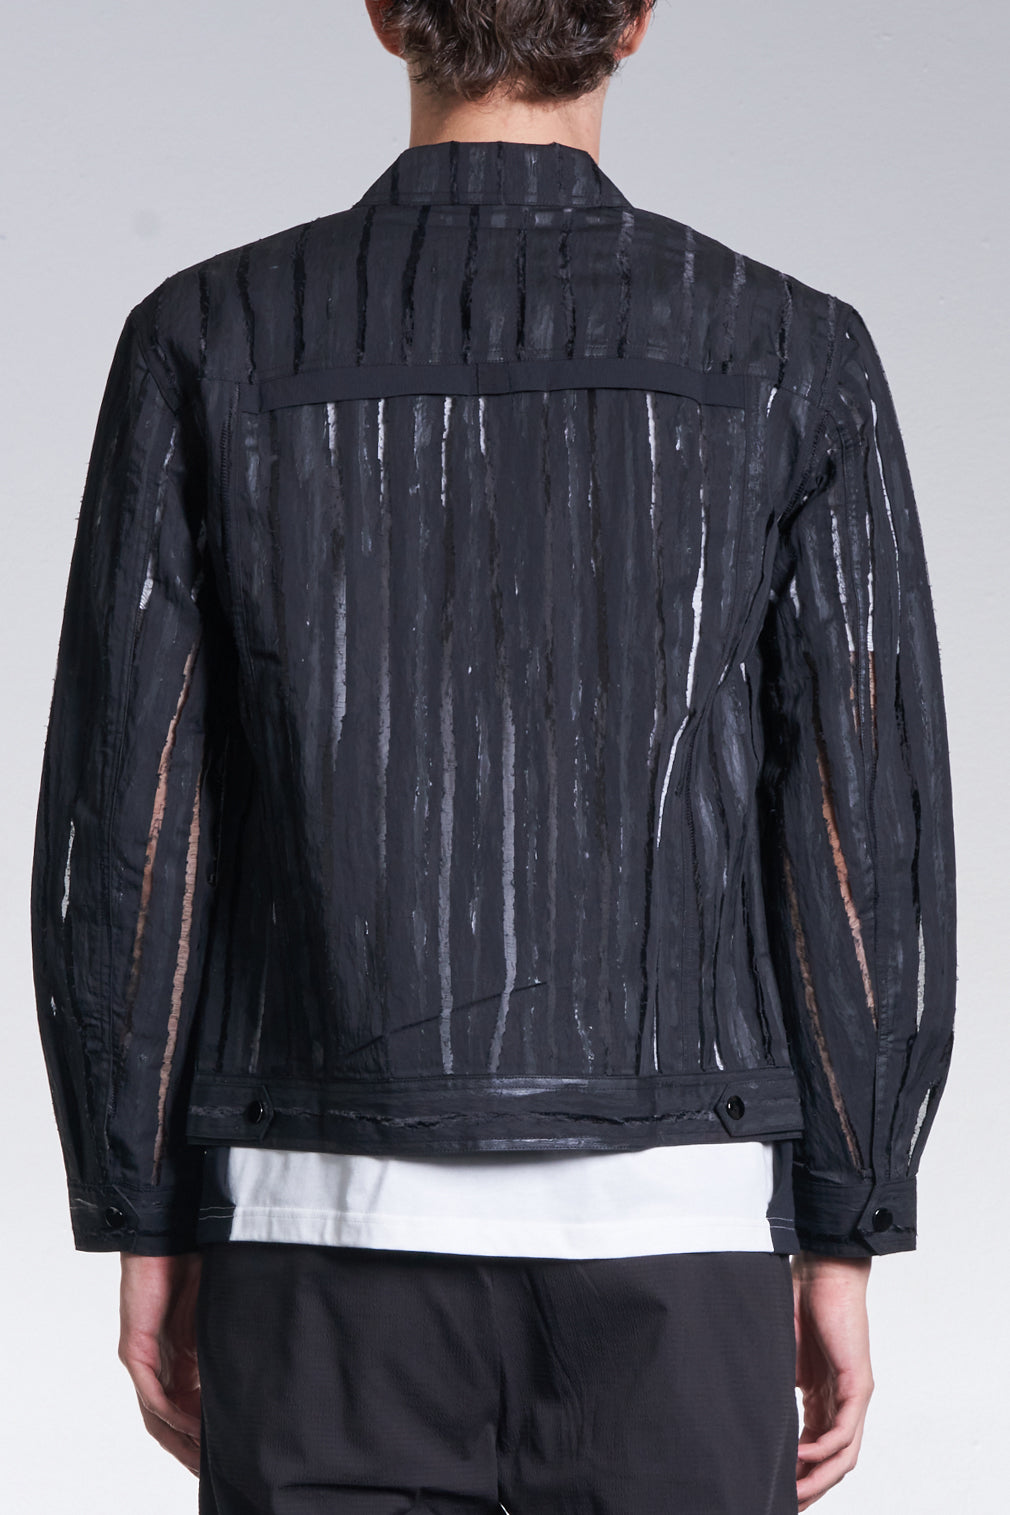 Jacket With Burnt Out And Hand Print Stripe